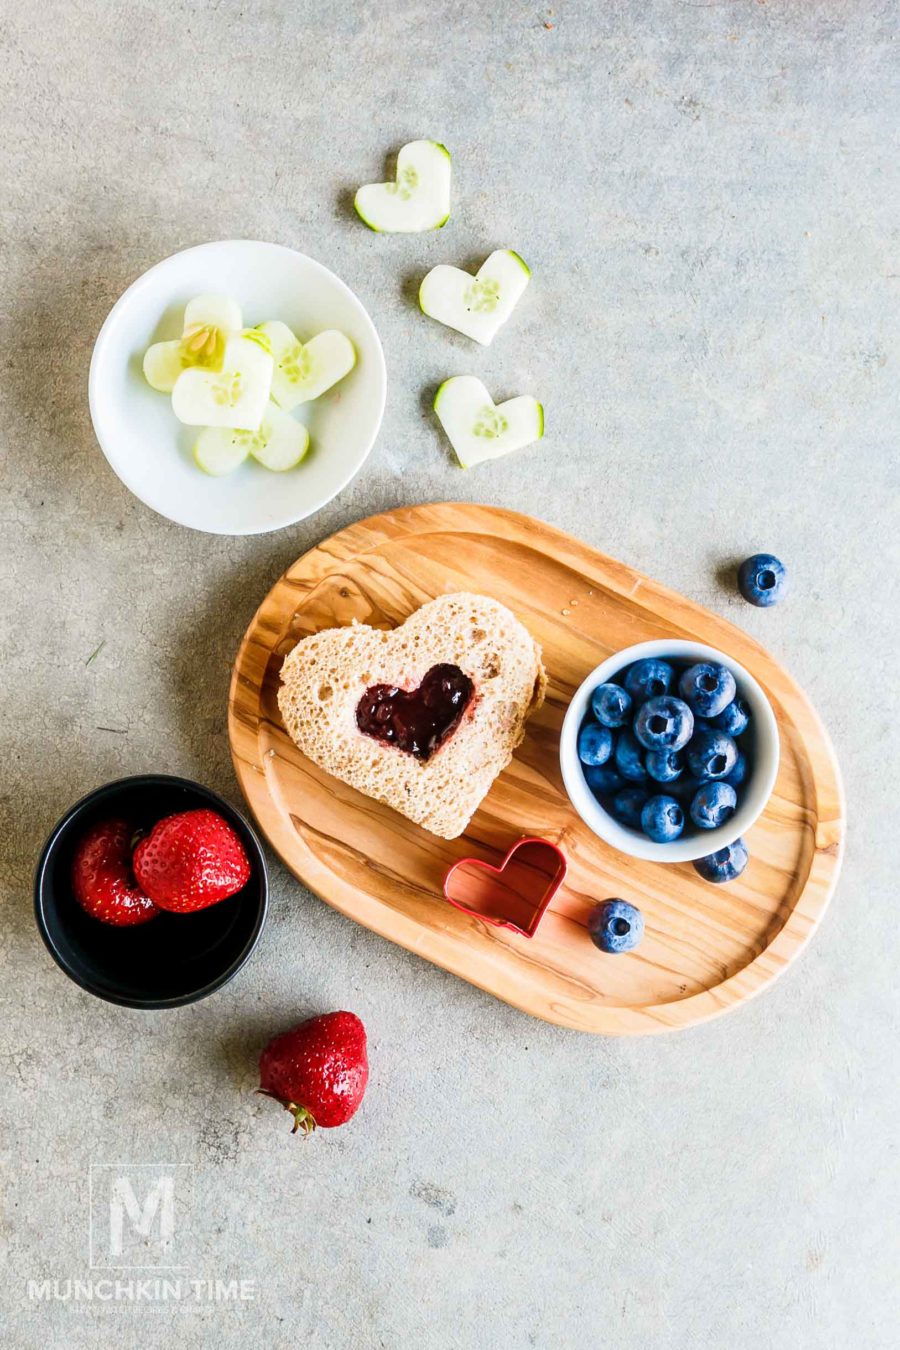 Peanut butter and jelly in heart shape. Back to school lunch idea.